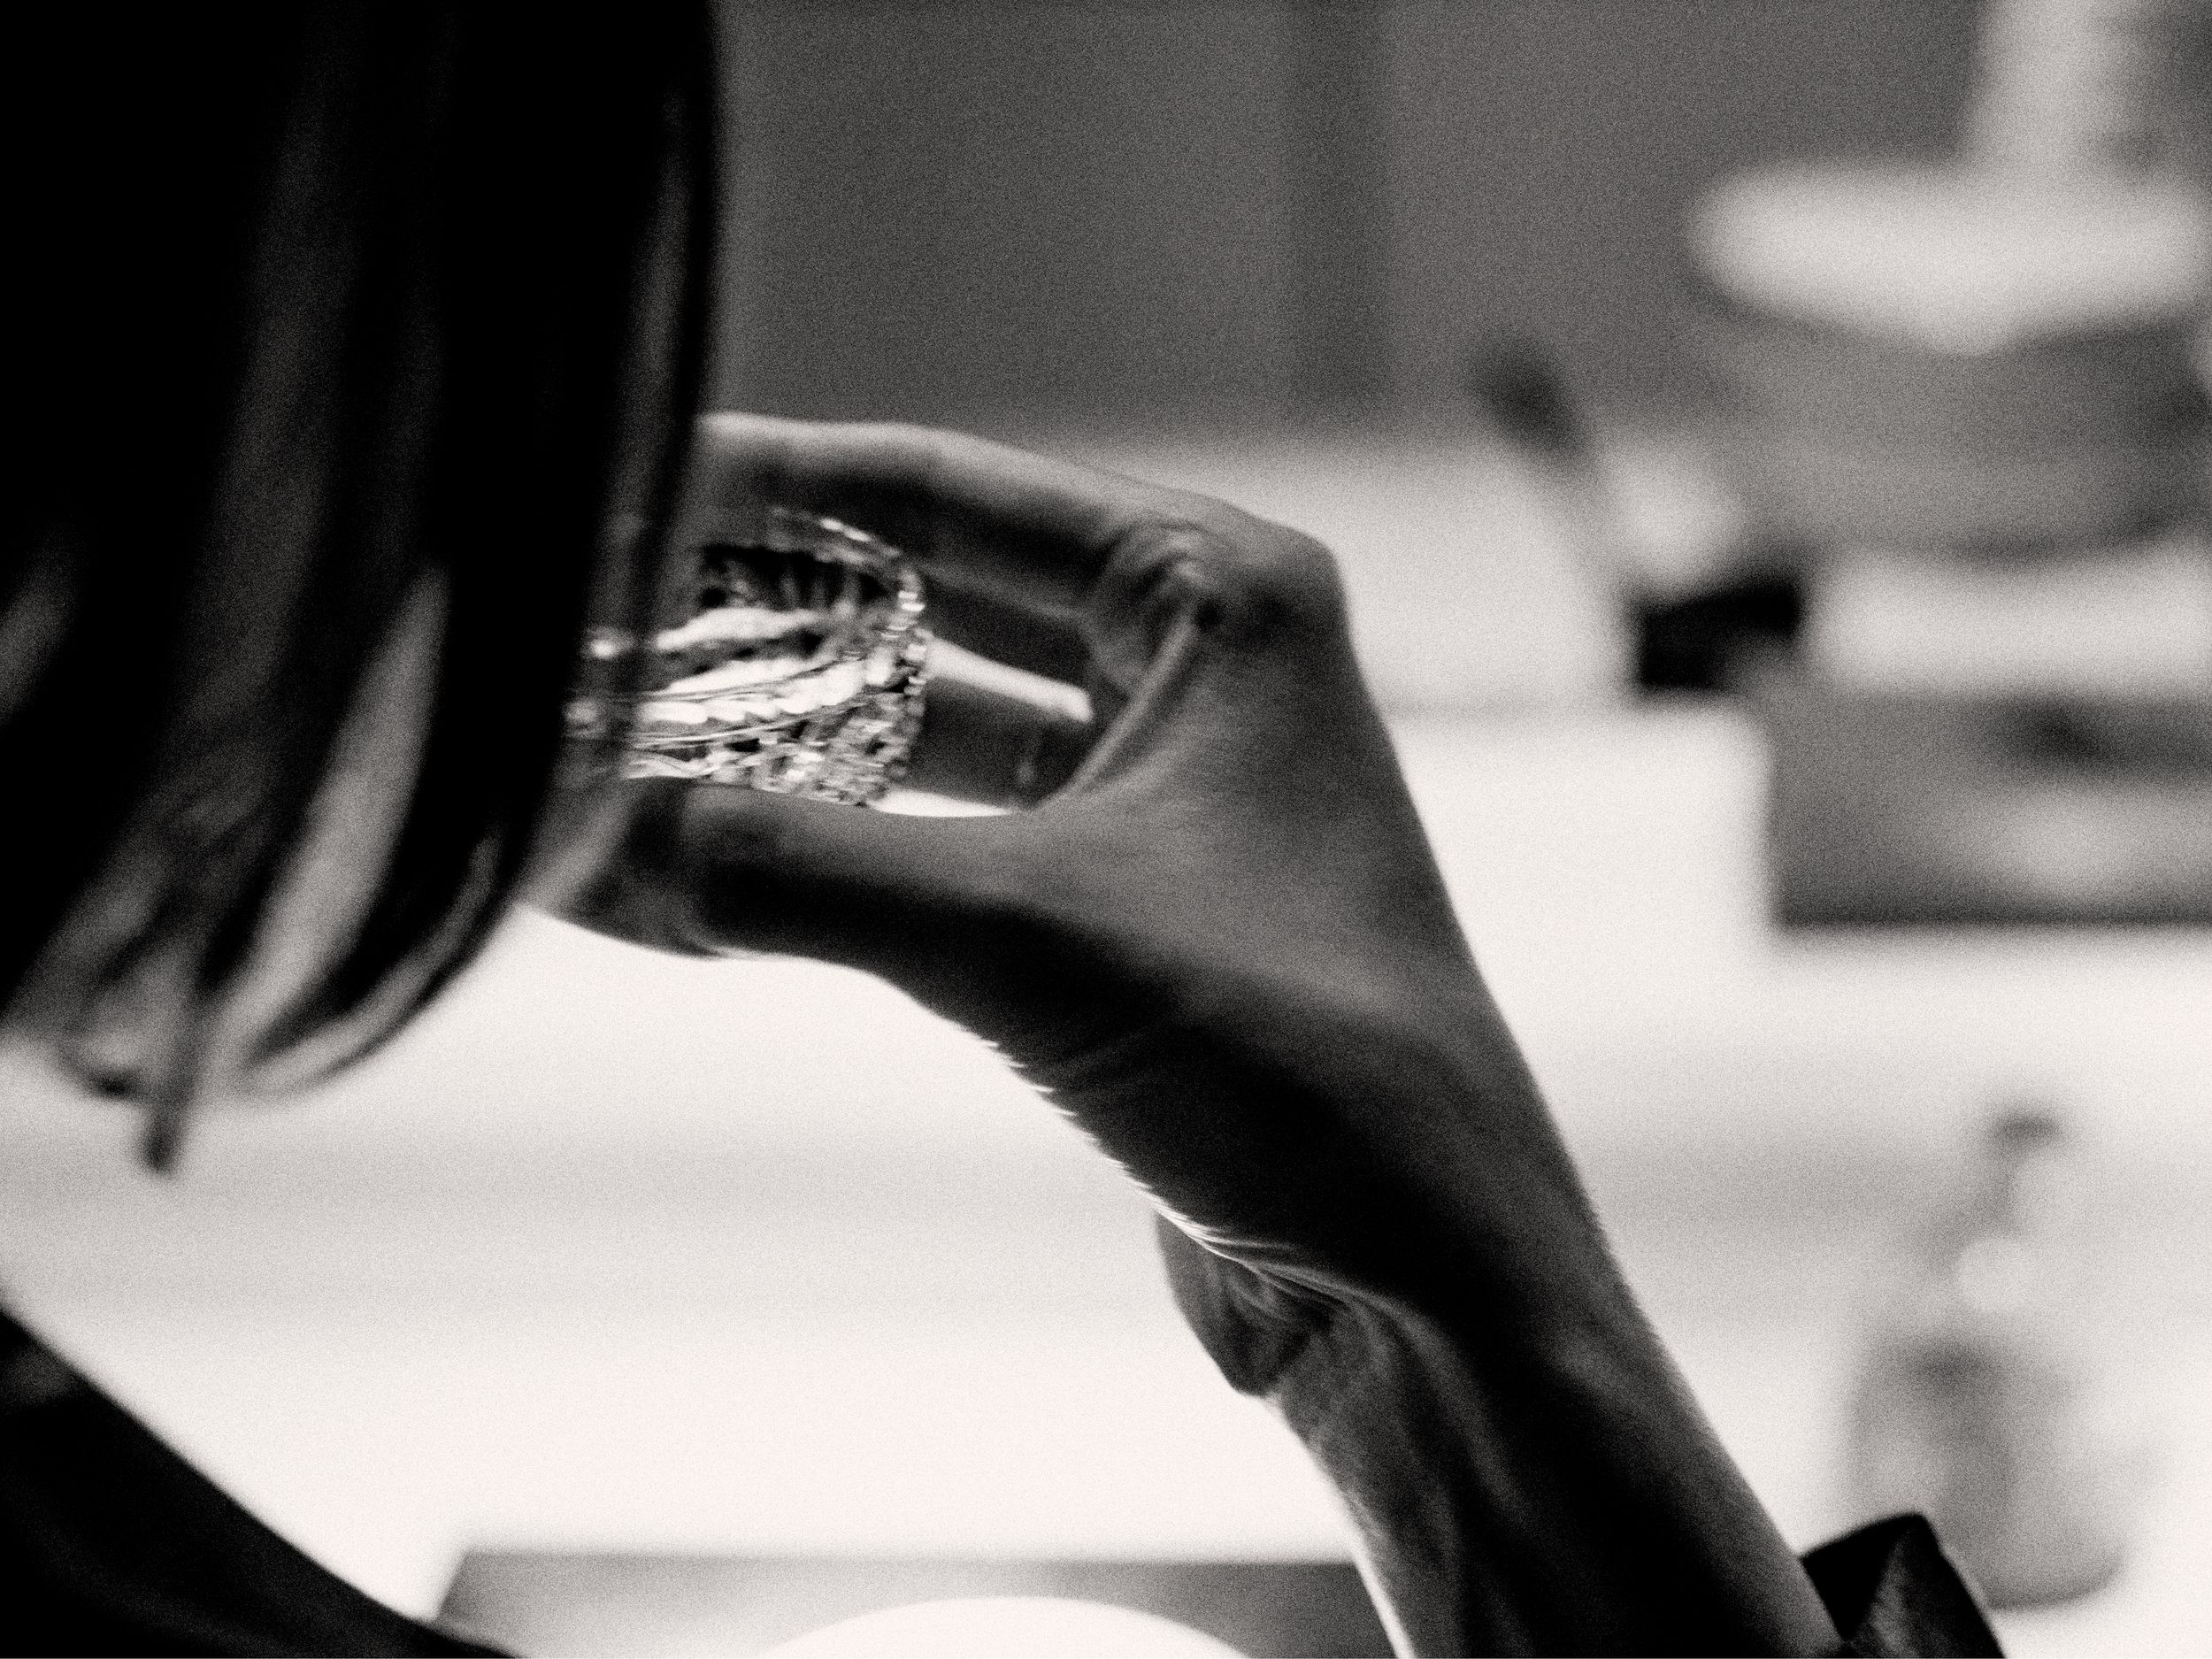 A guest enjoying a glass of sake at Nama, Aman New York. Photographed by Chris Colls.